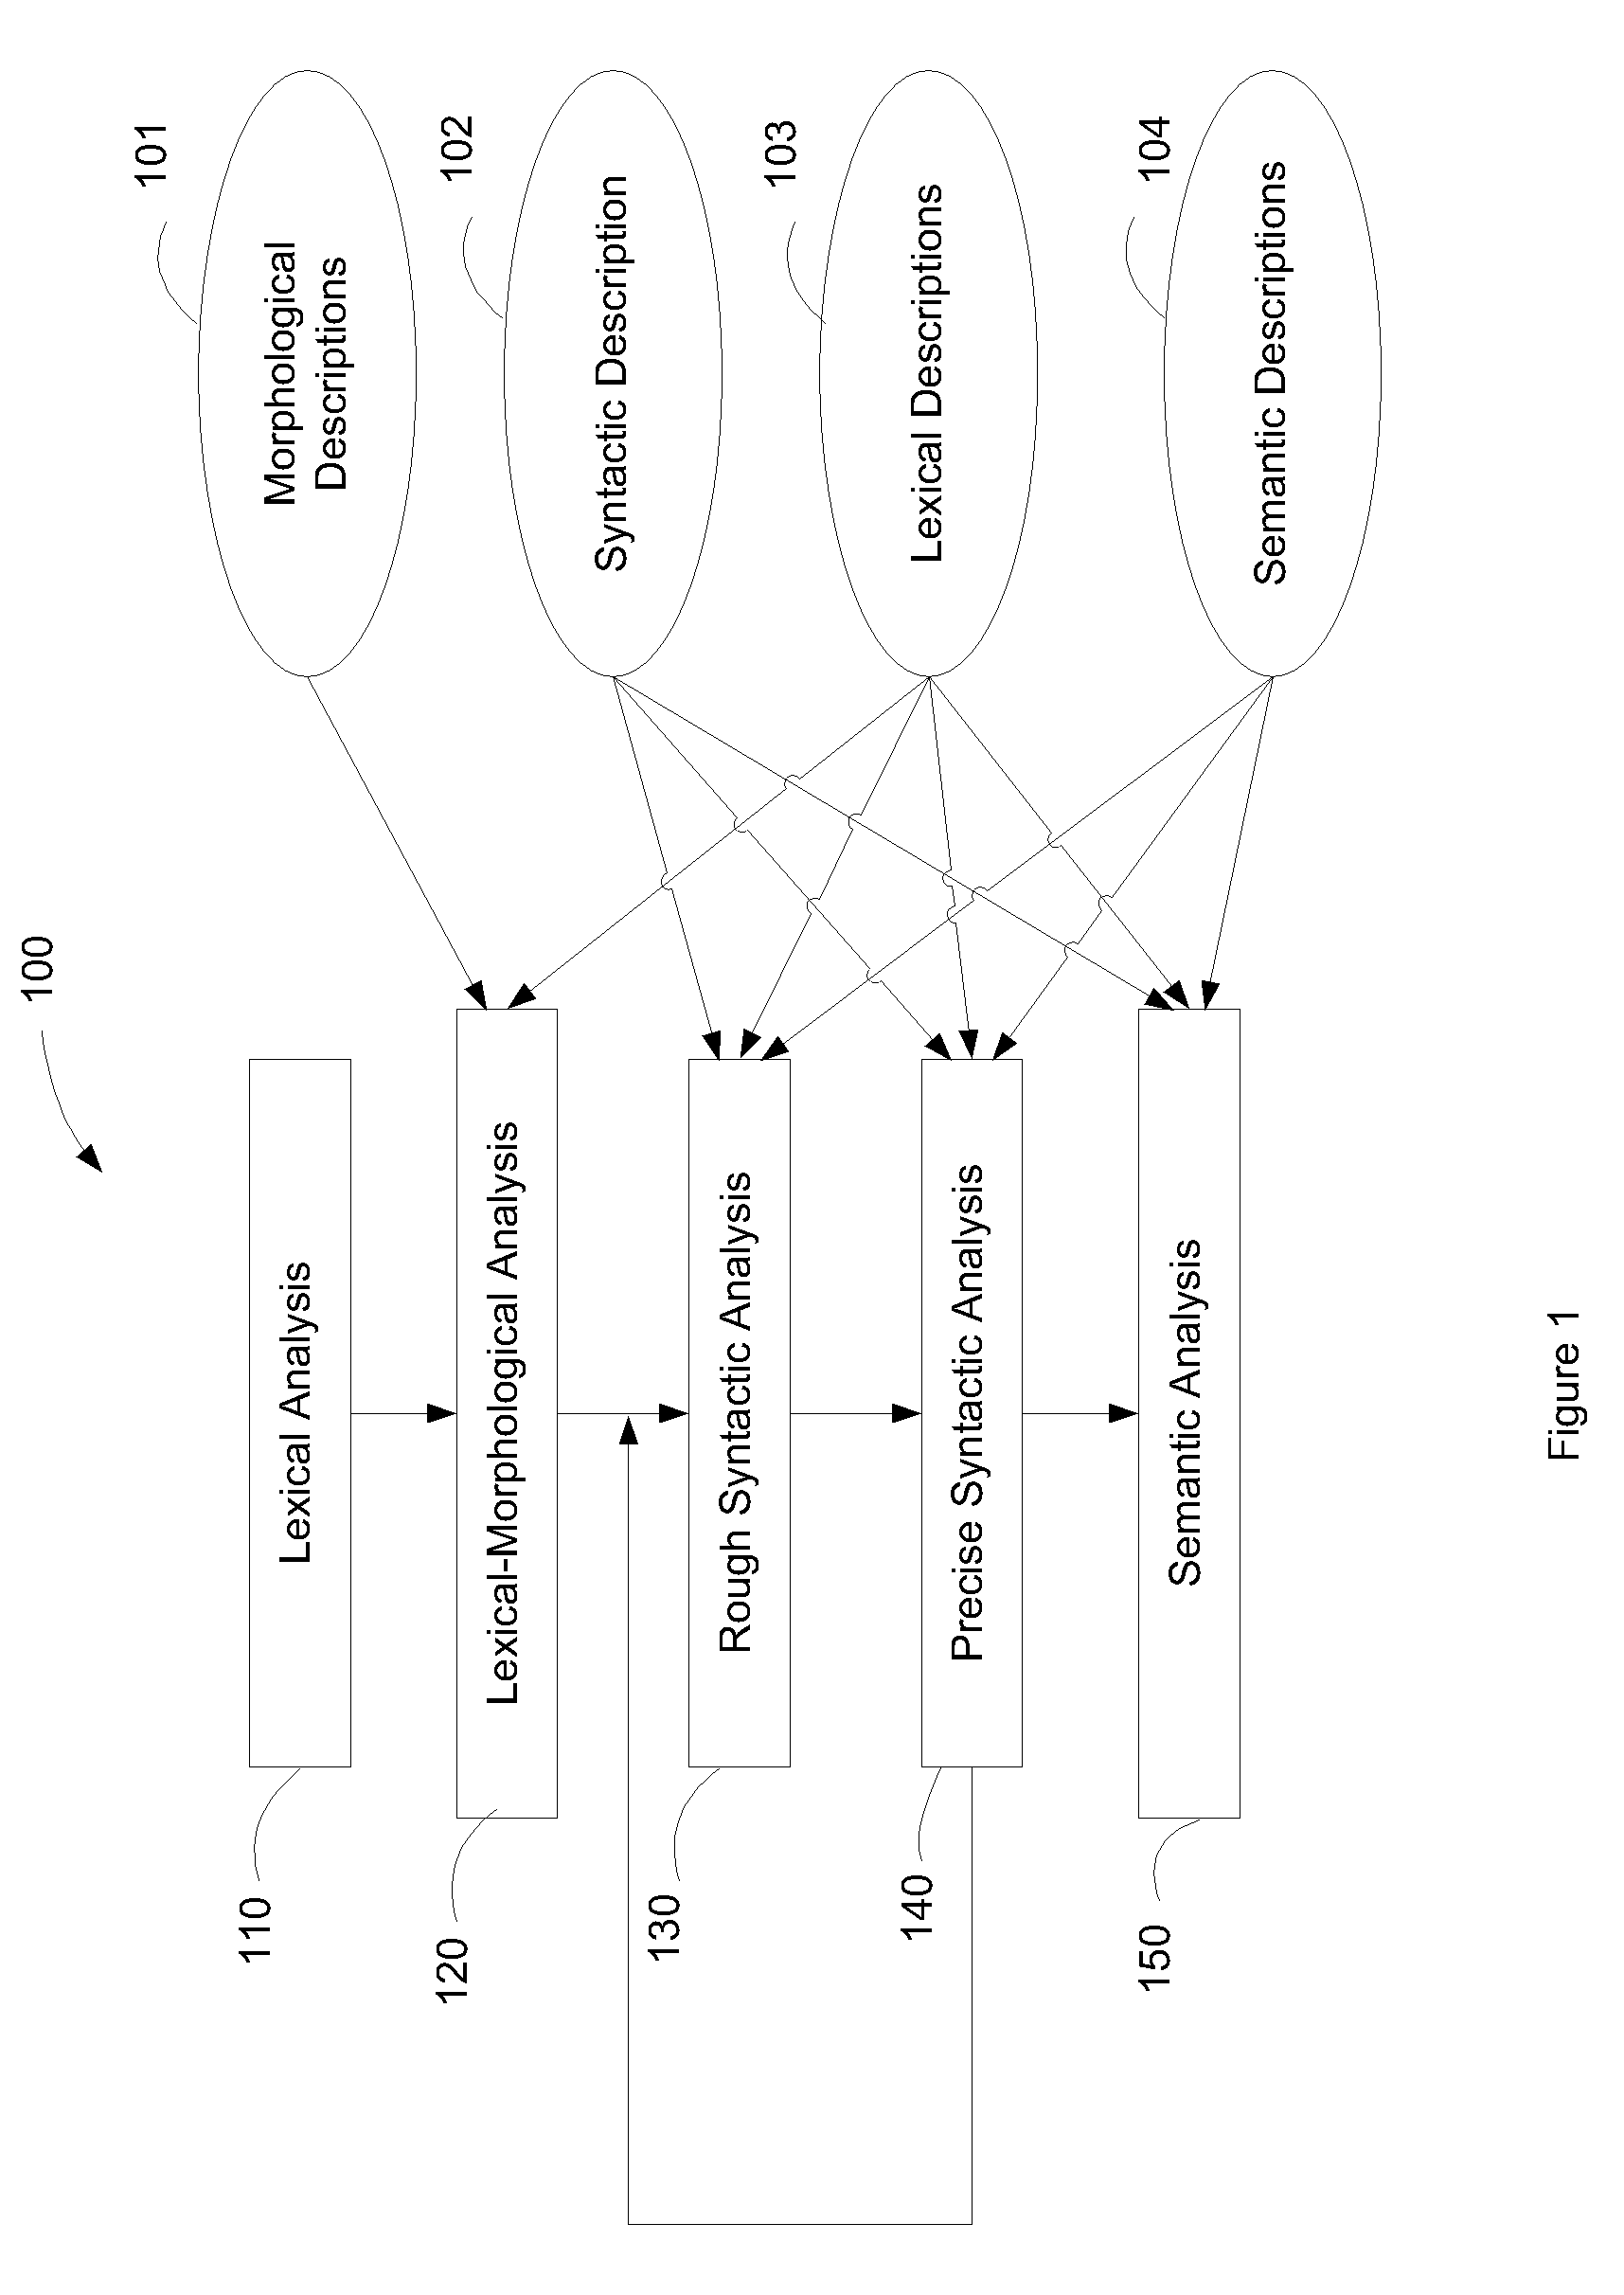 Method and system for analyzing various languages and constructing language-independent semantic structures